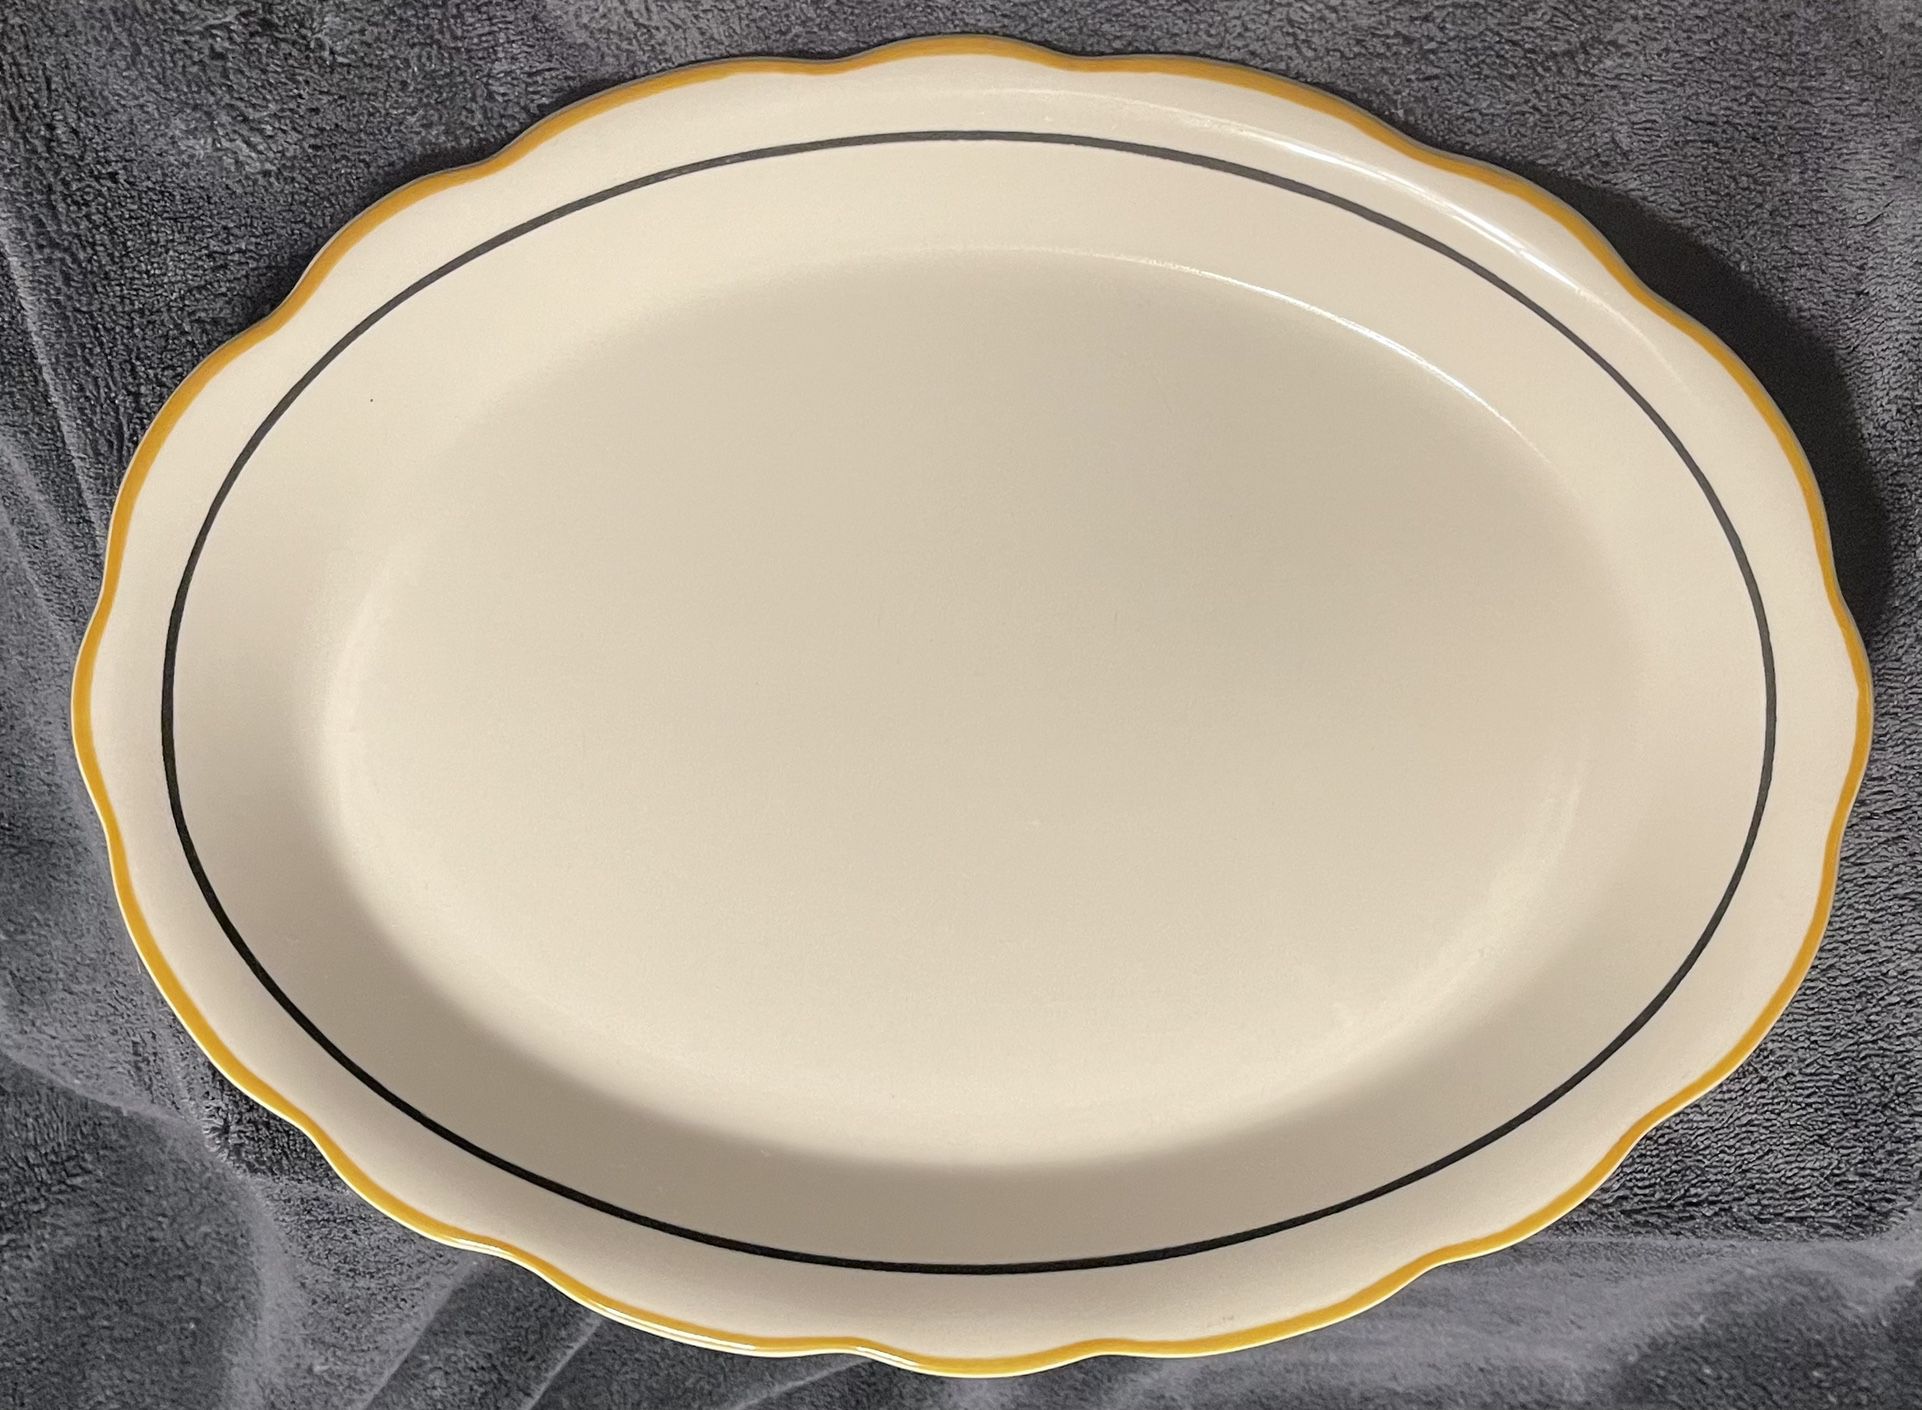 Vintage Buffalo China Restaurant Ware Platter With Beige and Black Stripes.  